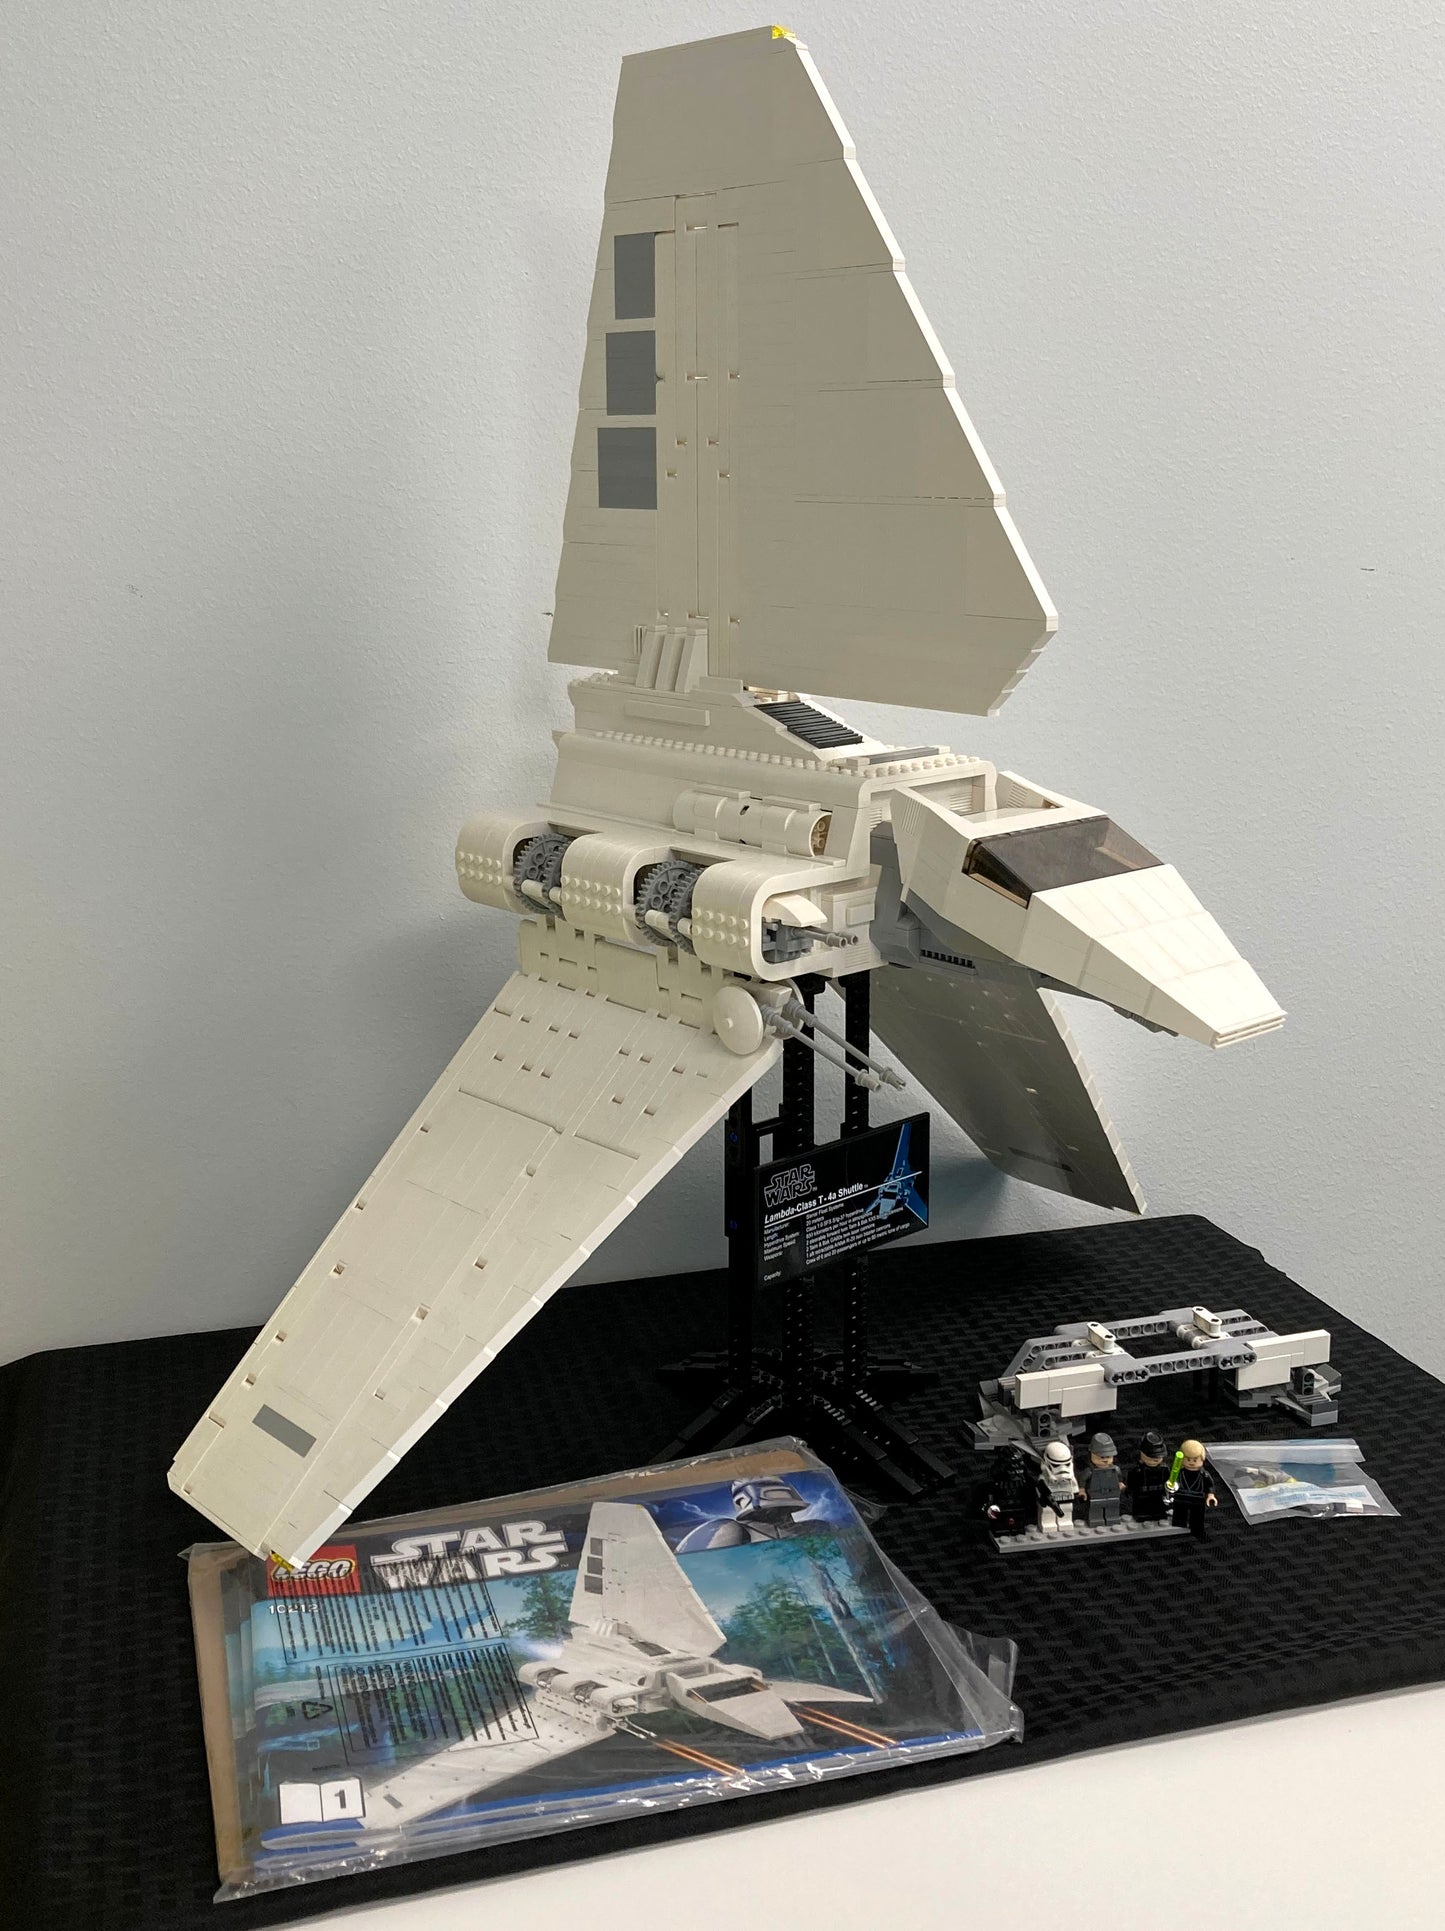 Used Set 10212 Imperial Shuttle - UCS (with Instruction Manuals, No Box) (IN-STORE PICKUP ONLY)